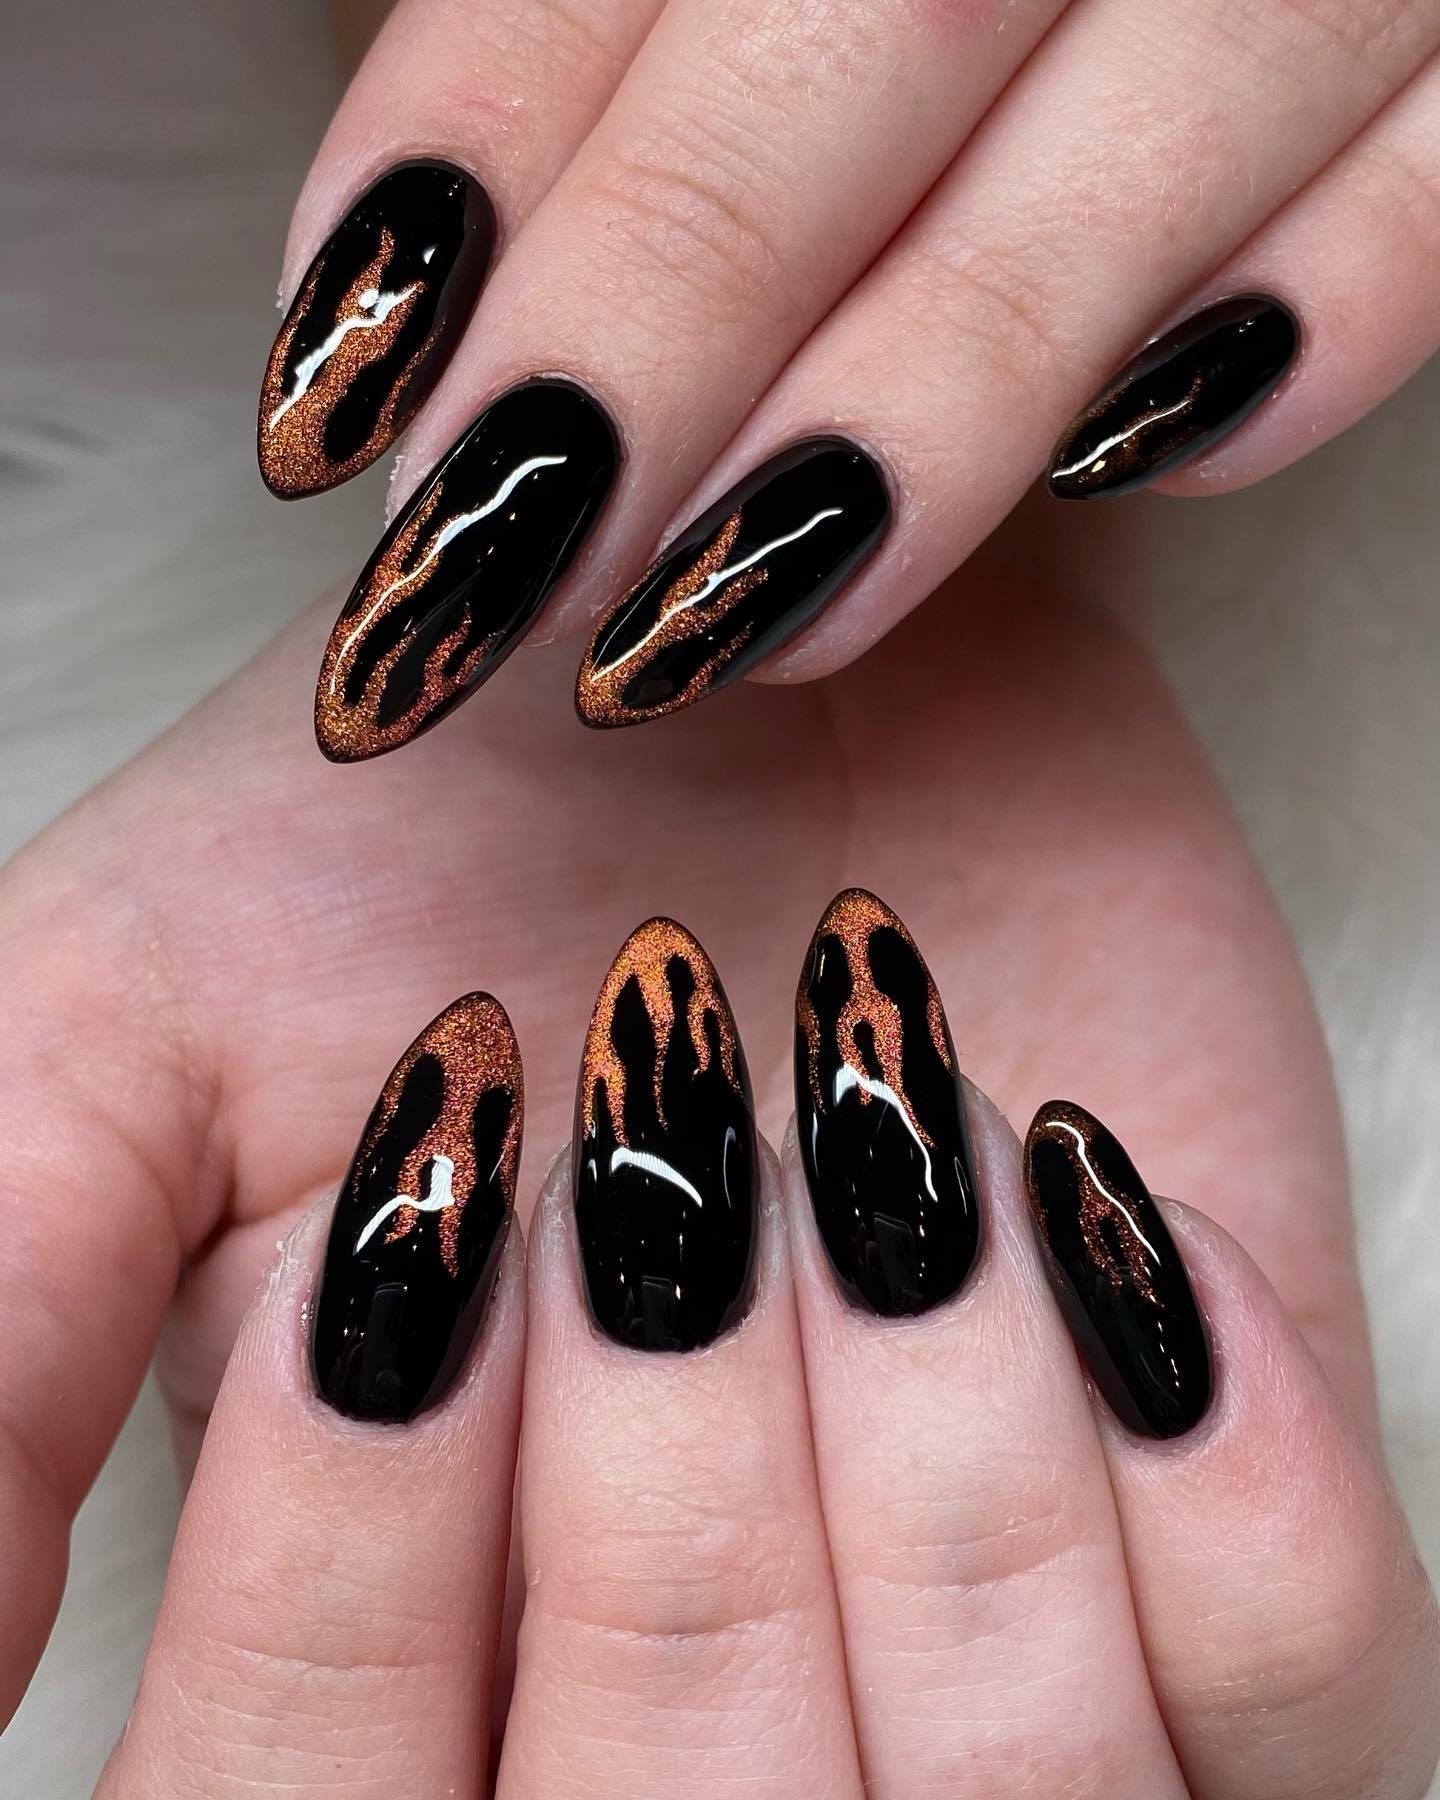 You don't need to cover up your nails with cat eyes. Instead, you can have this nail art in different shapes. The one above is a great example of it since aurora flames are used on tips.